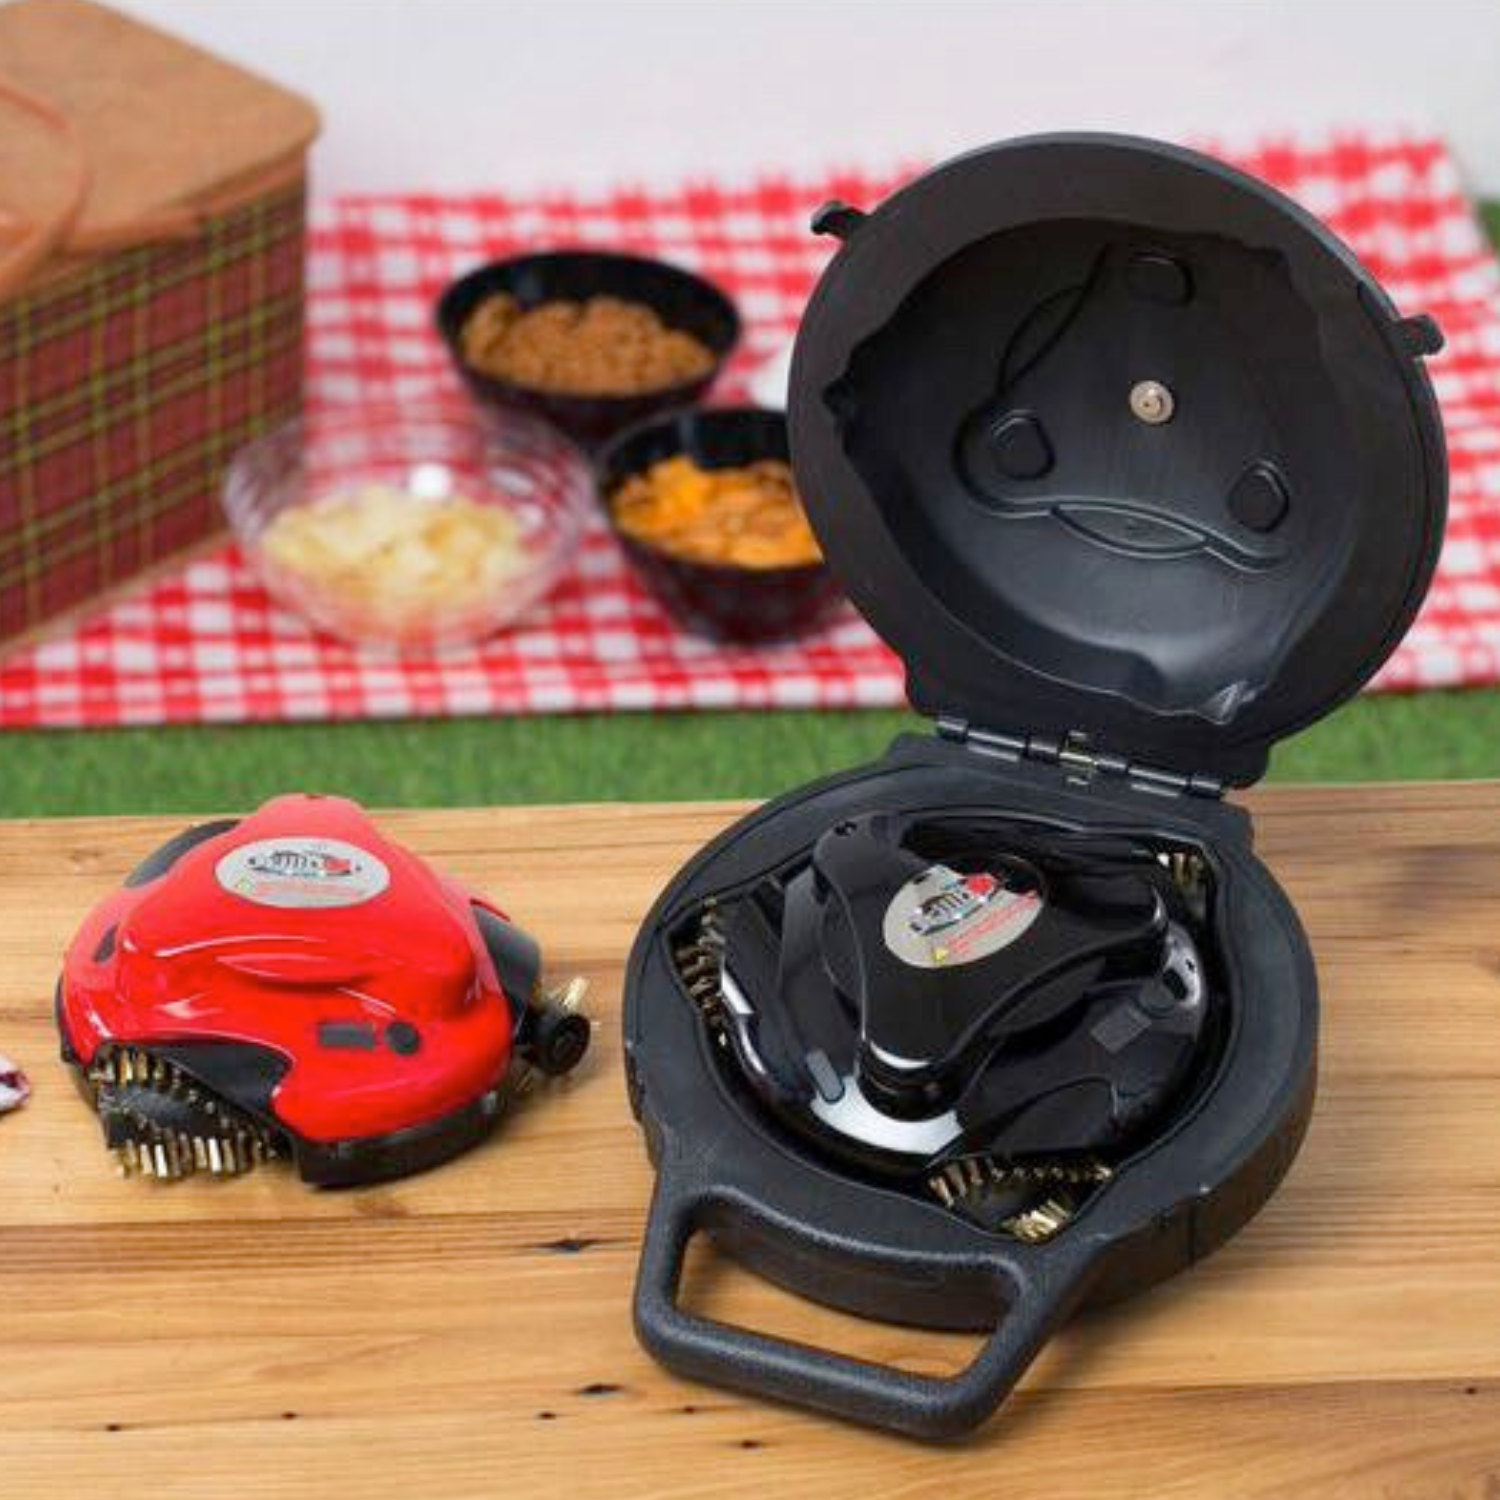 Grillbot Automatic Grill Cleaning Robot (Black)